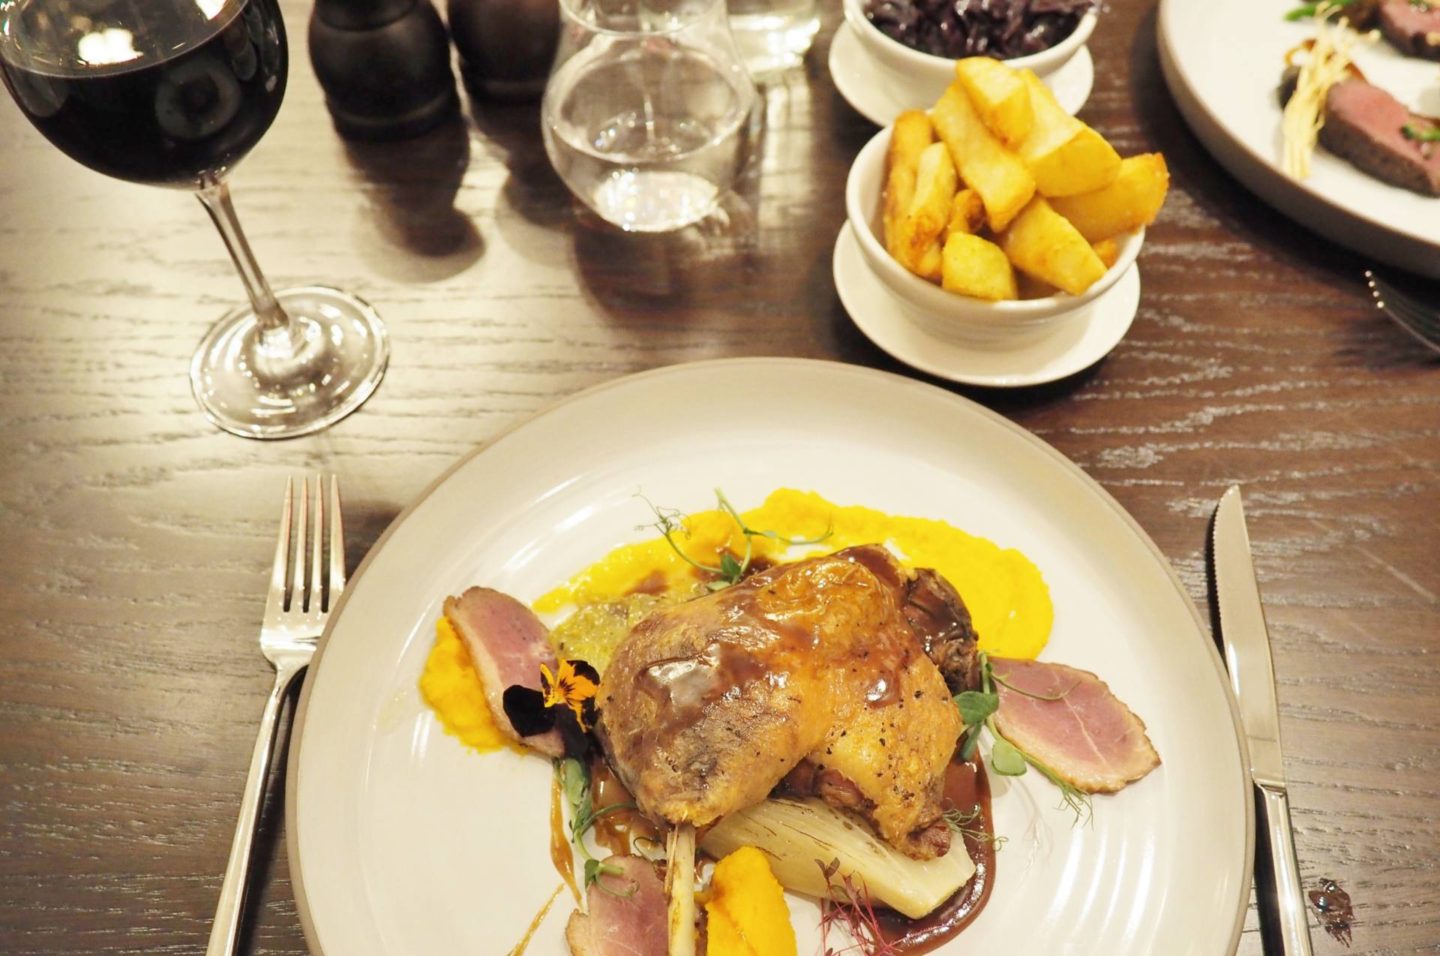 Three Church Road Confit duck leg, butternut puree, chicory, curd duck breast, red wine jus